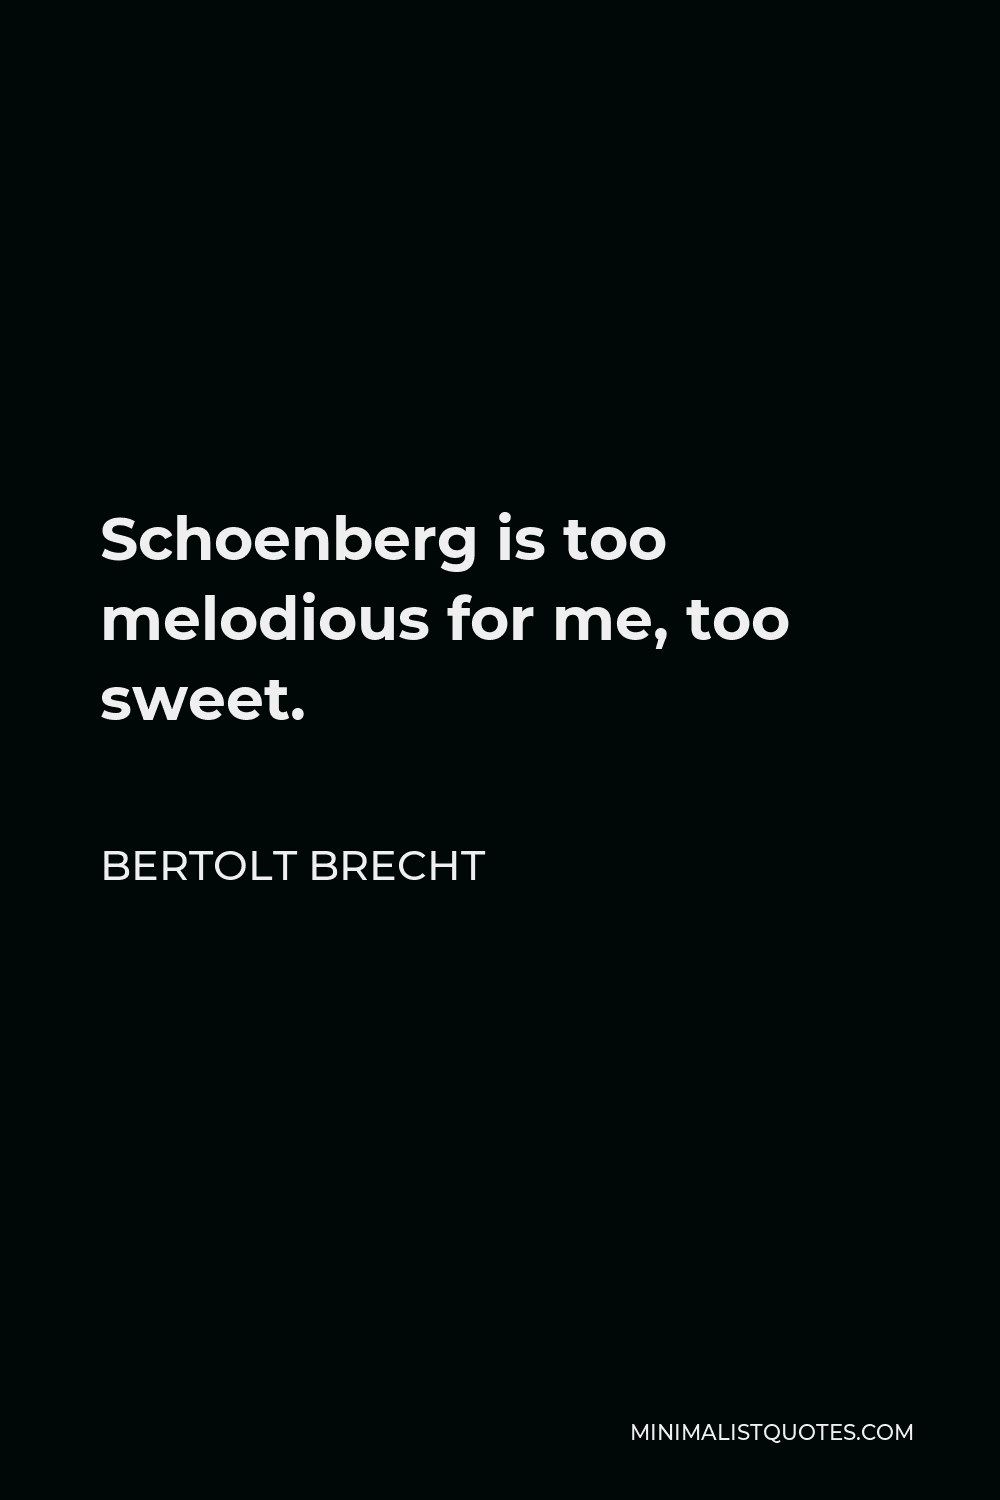 Bertolt Brecht Quote - Schoenberg is too melodious for me, too sweet.